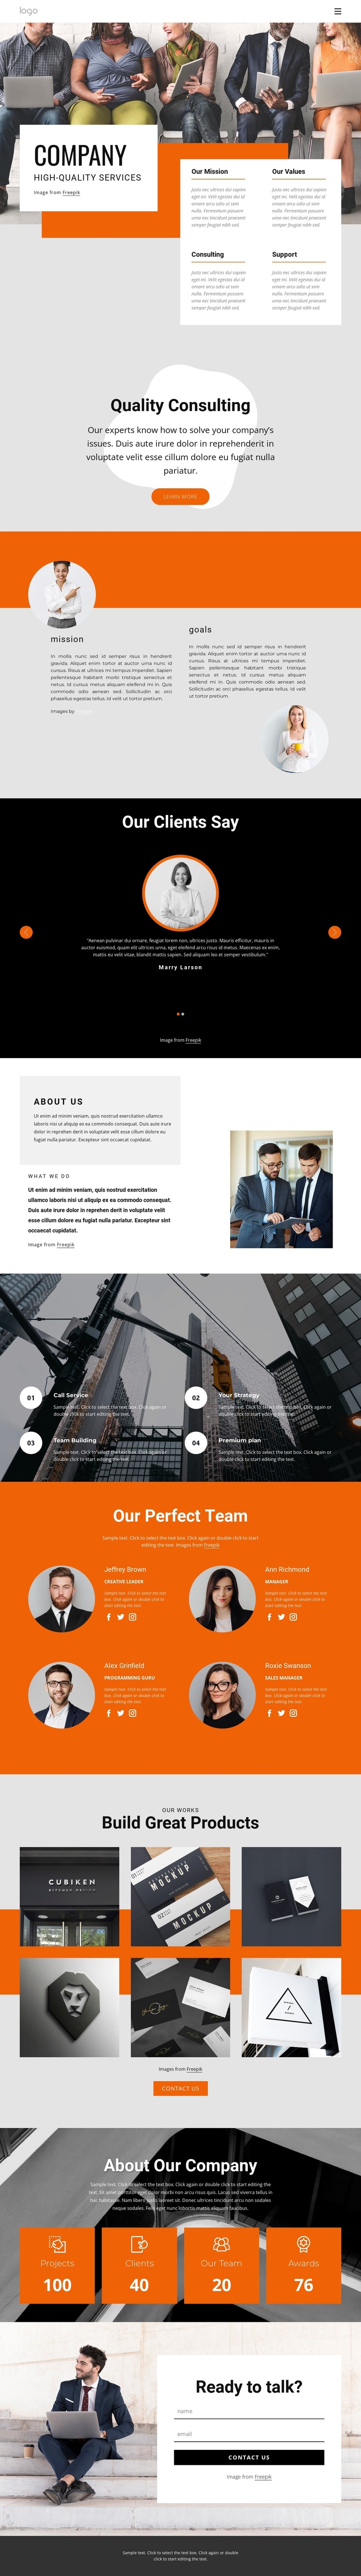 Hight quality consulting firm Joomla Template